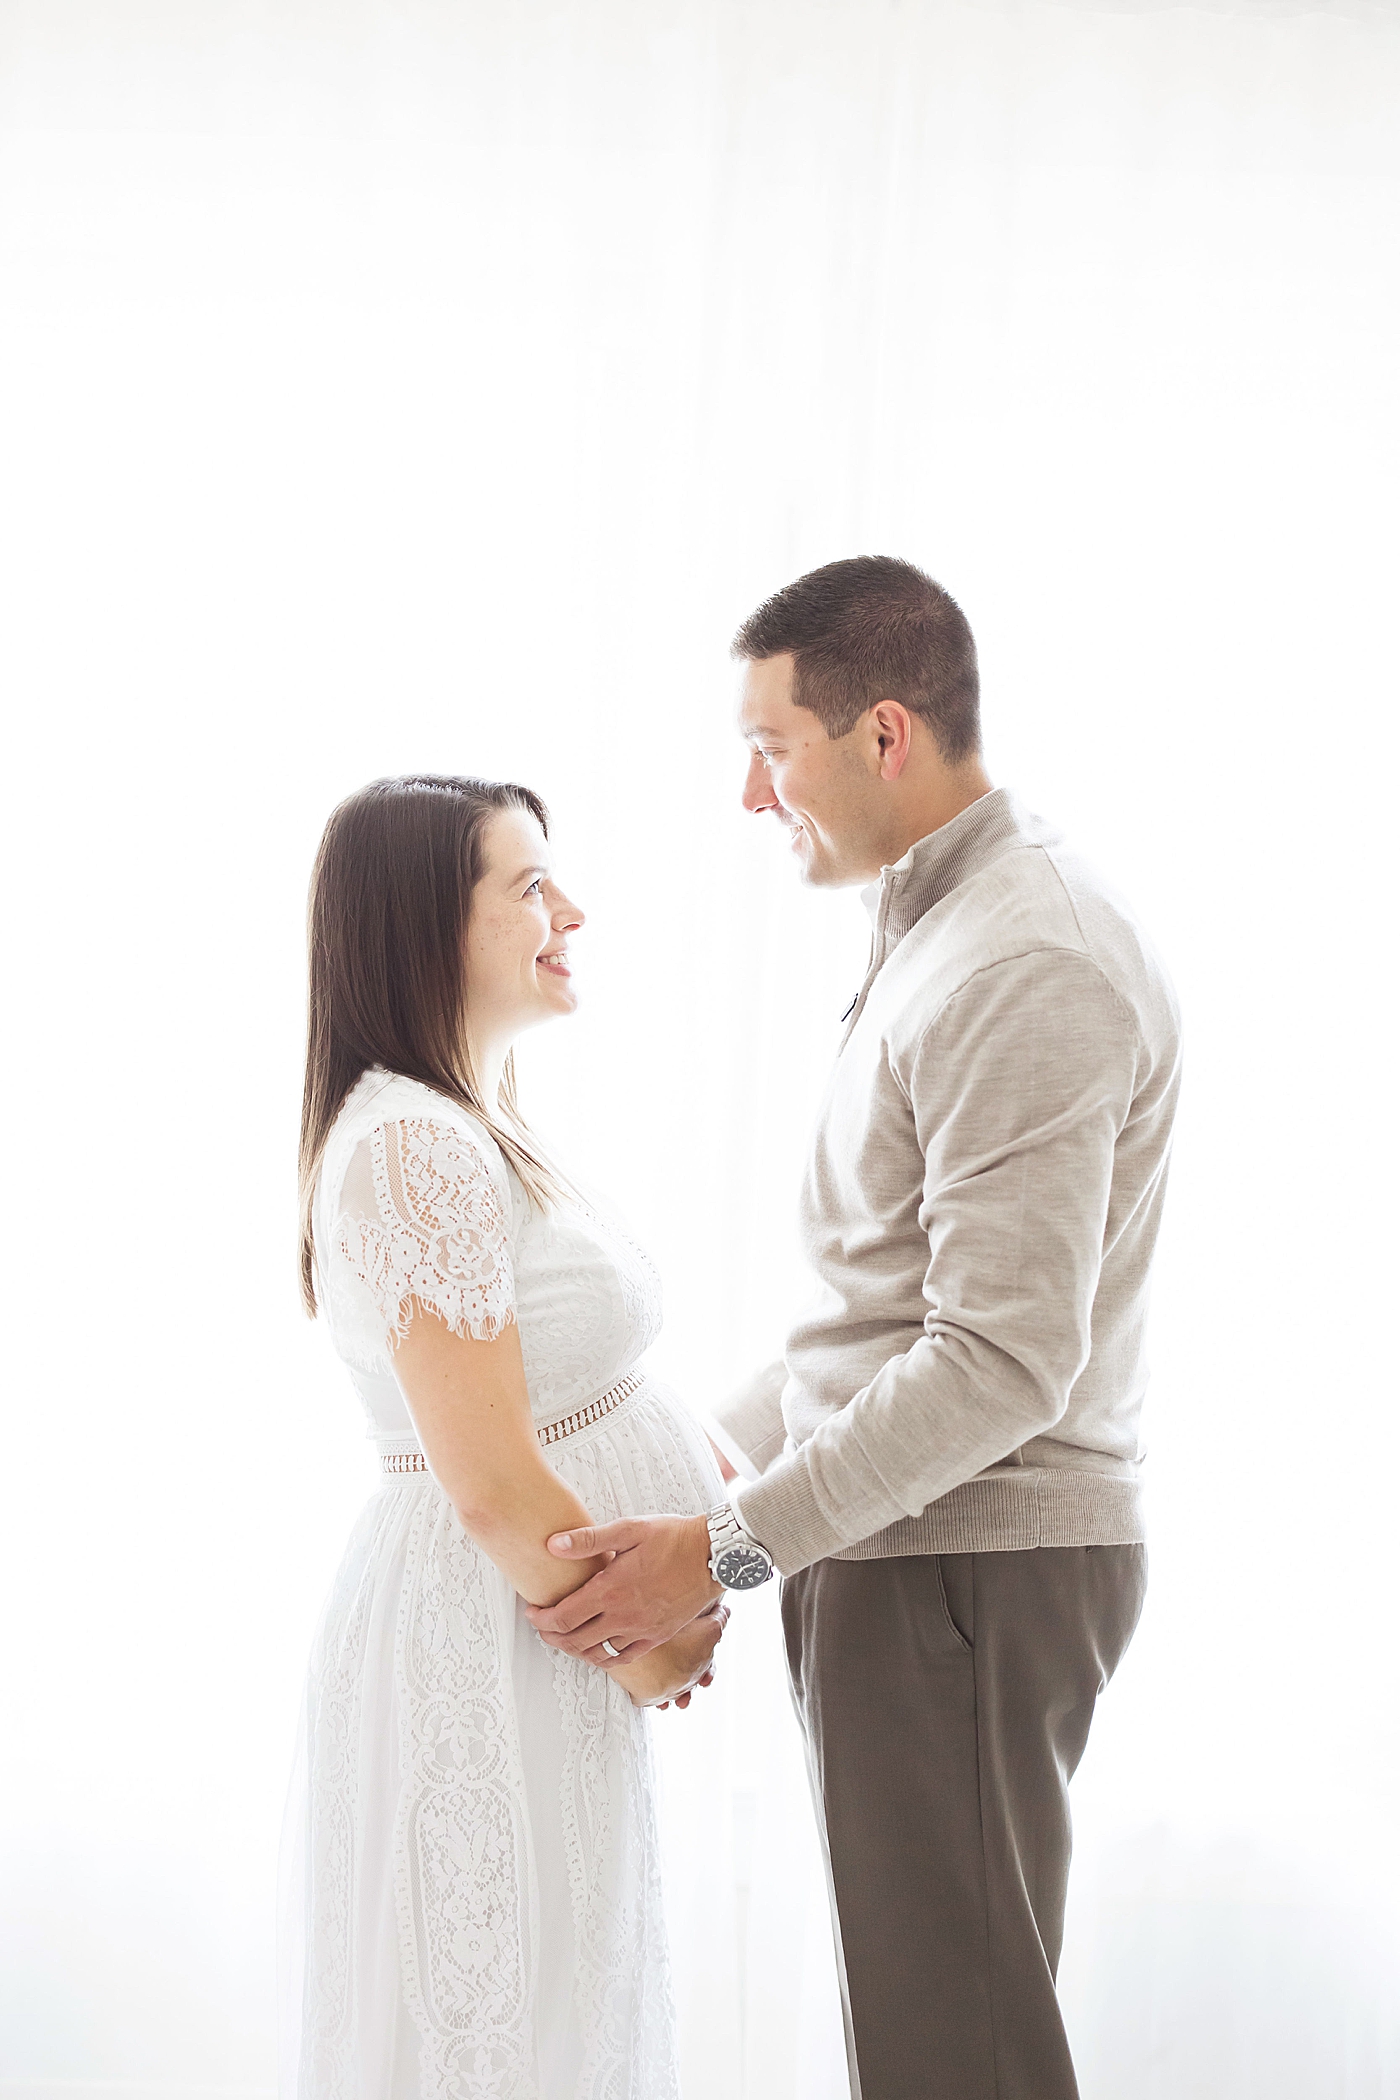 Maternity session for first-time expecting parents. Photo by Fresh Light Photography.